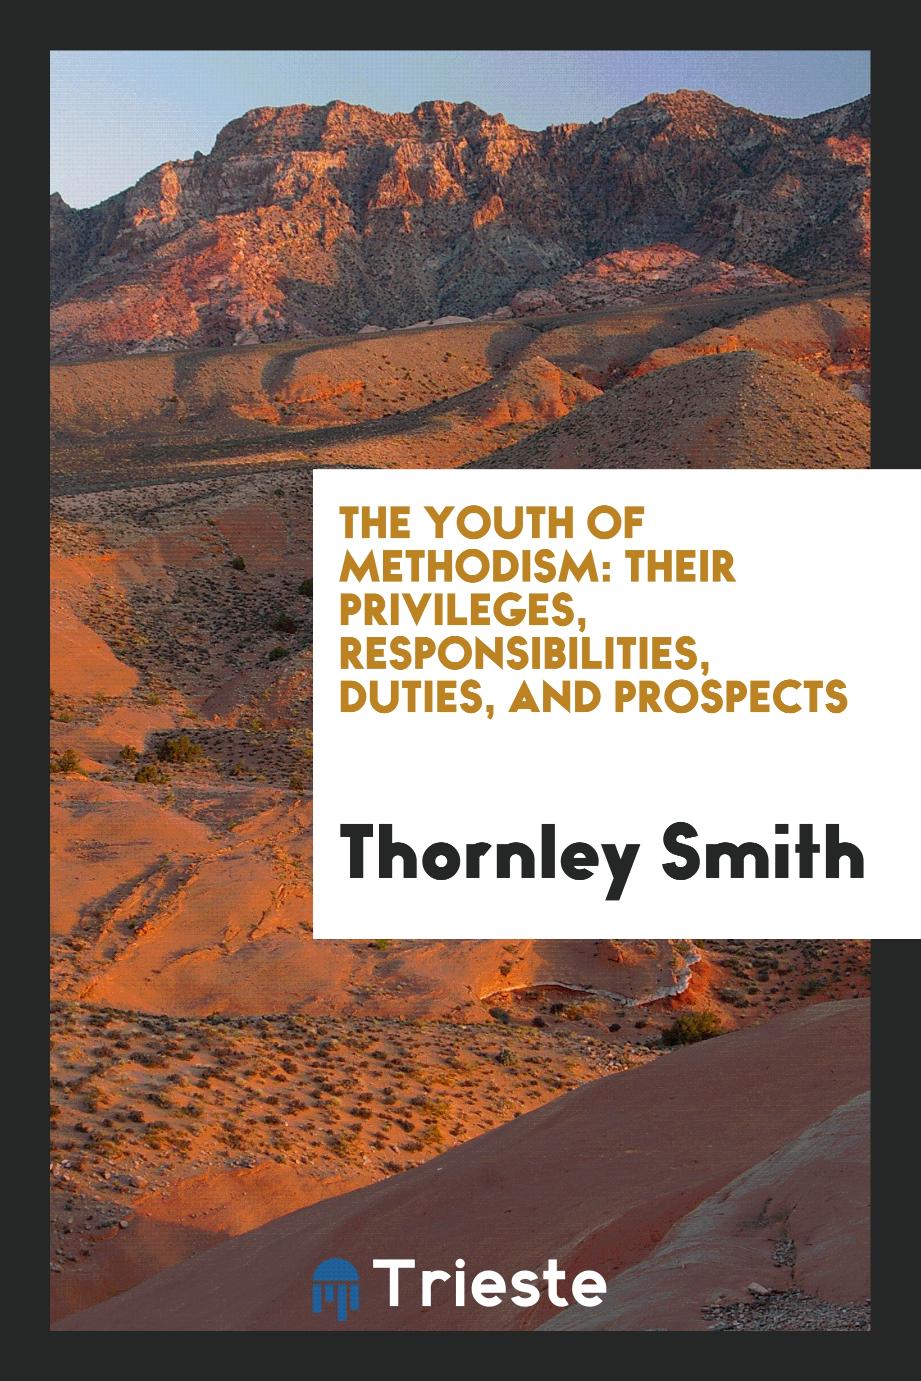 The Youth of Methodism: Their Privileges, Responsibilities, Duties, and Prospects